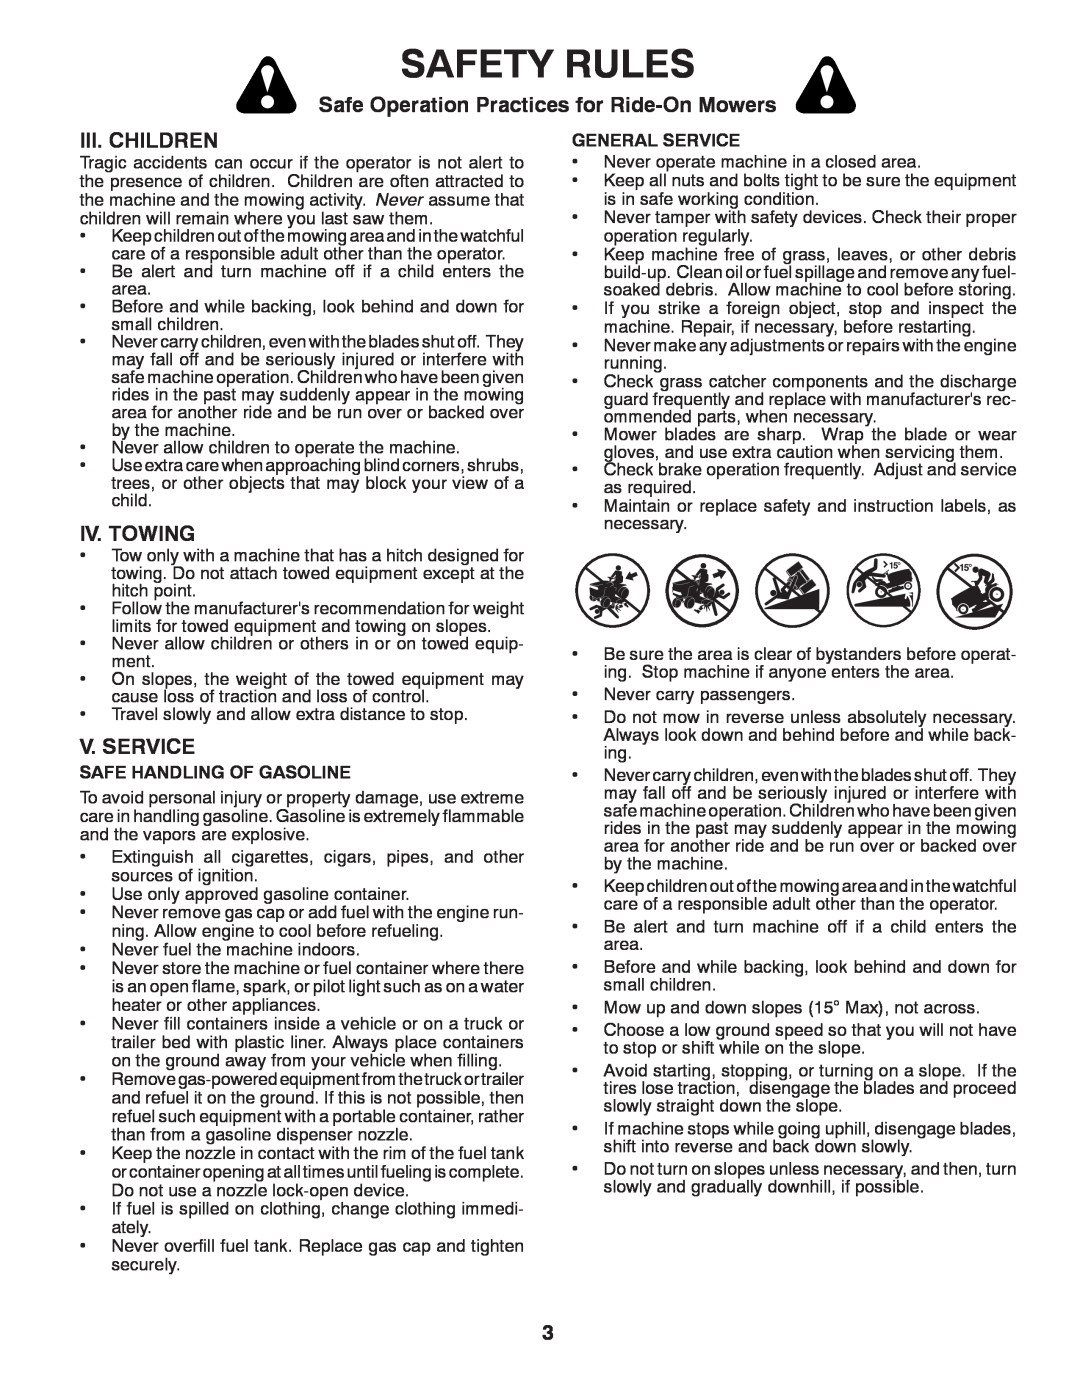 Poulan PO15542LT manual Iii. Children, Iv. Towing, V. Service, Safety Rules, Safe Operation Practices for Ride-OnMowers 